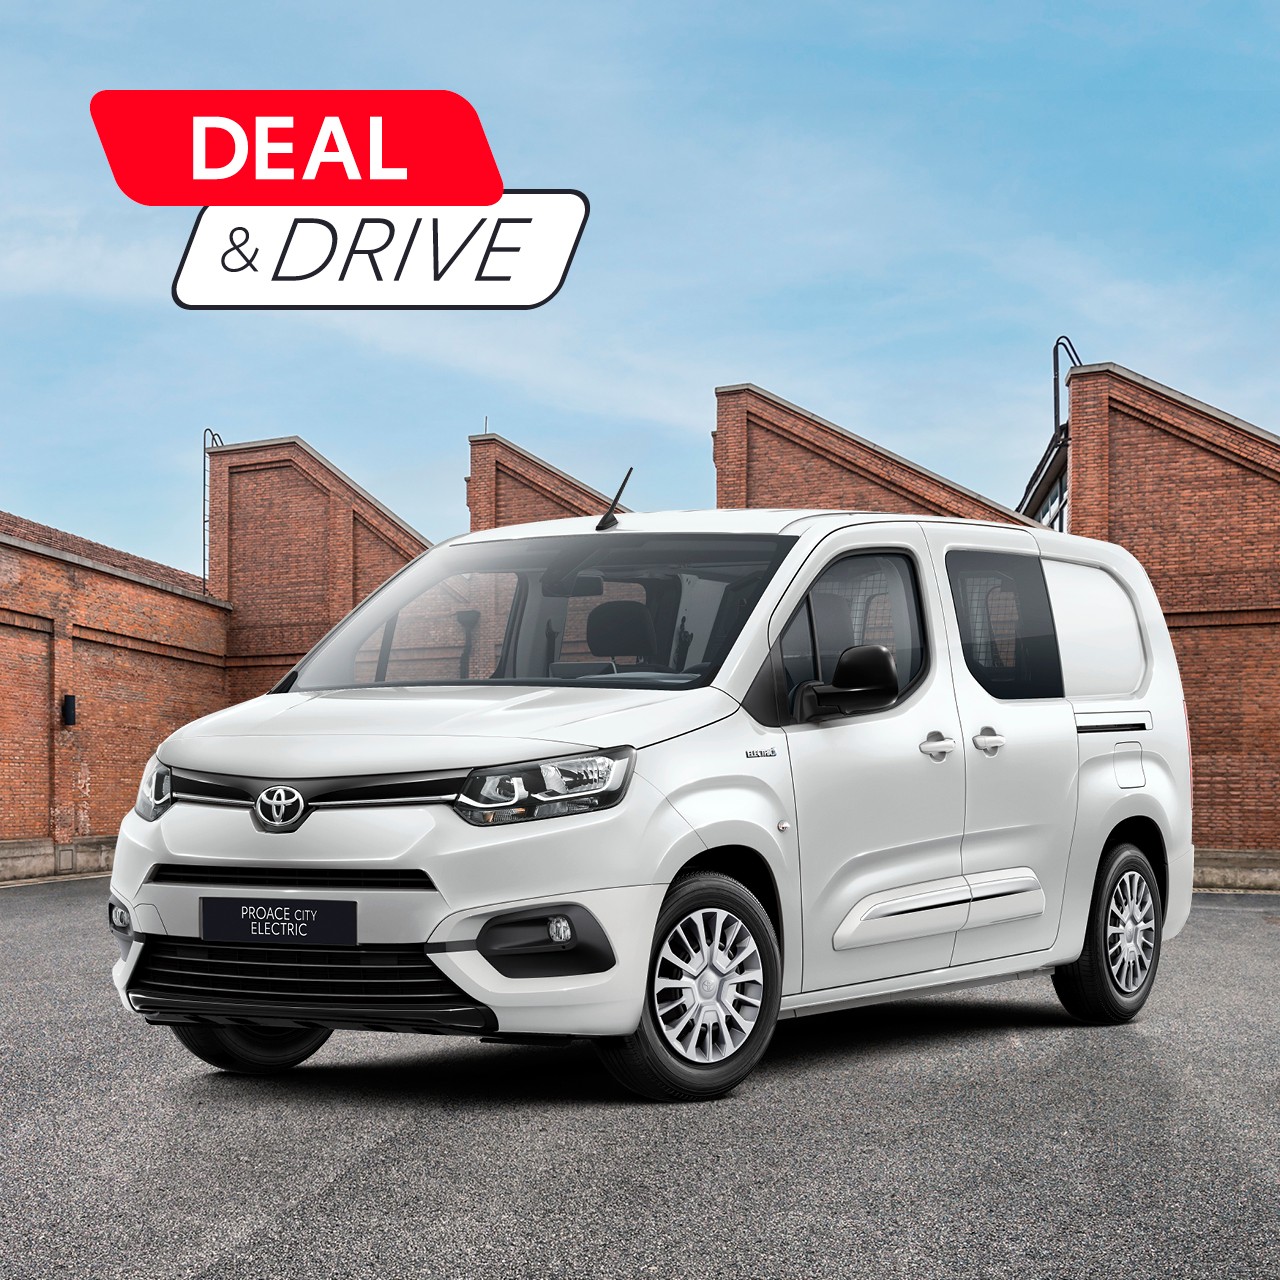 Toyota-Proace-City-Electric-Deal-and-Drive-sl1a